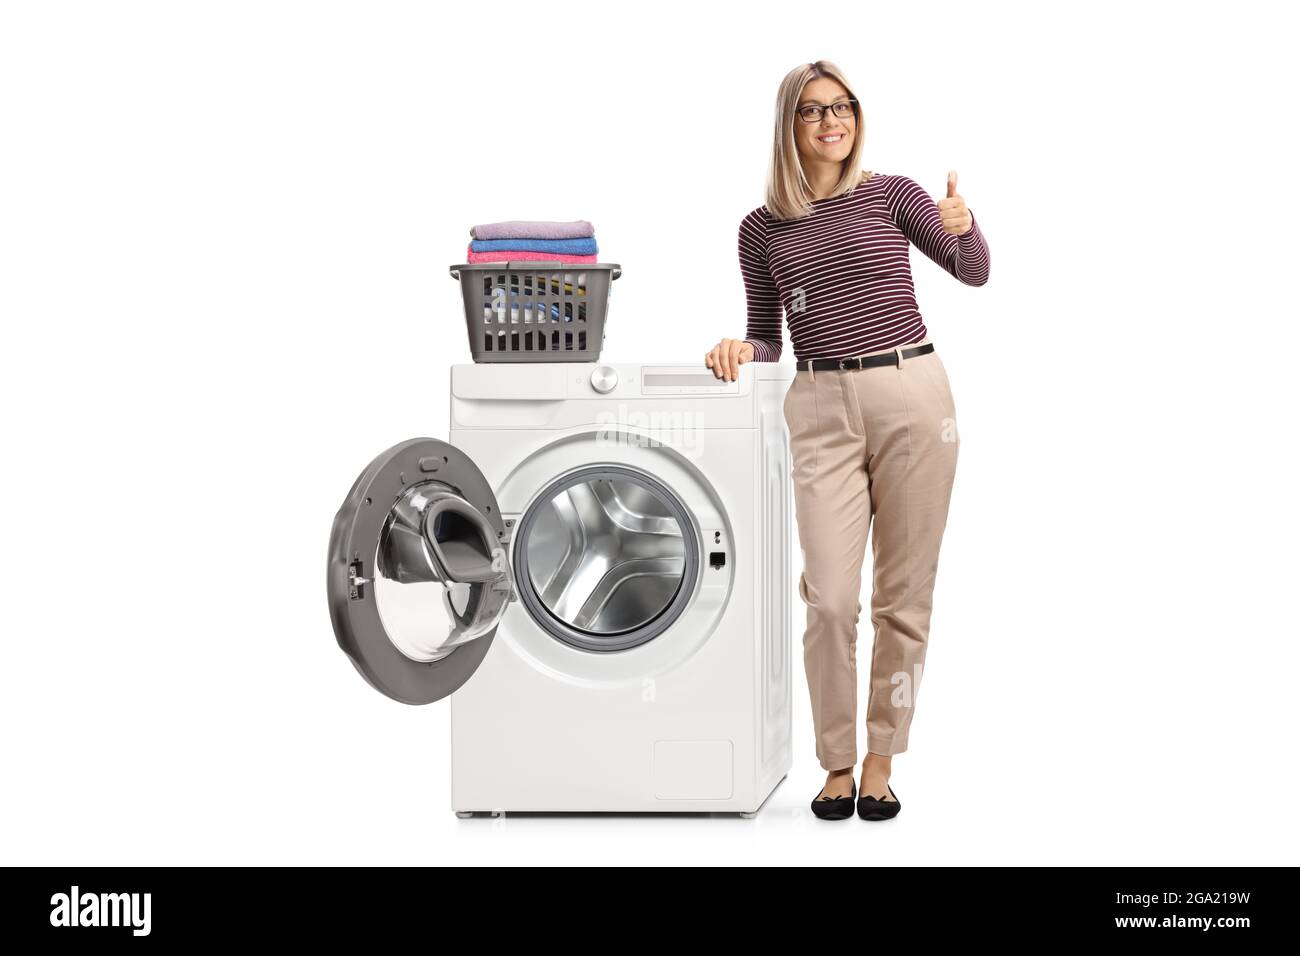 Full length portrait of a blond woman leaning on a washing machine with folded clothes and showing thumbs up isolated on white background Stock Photo